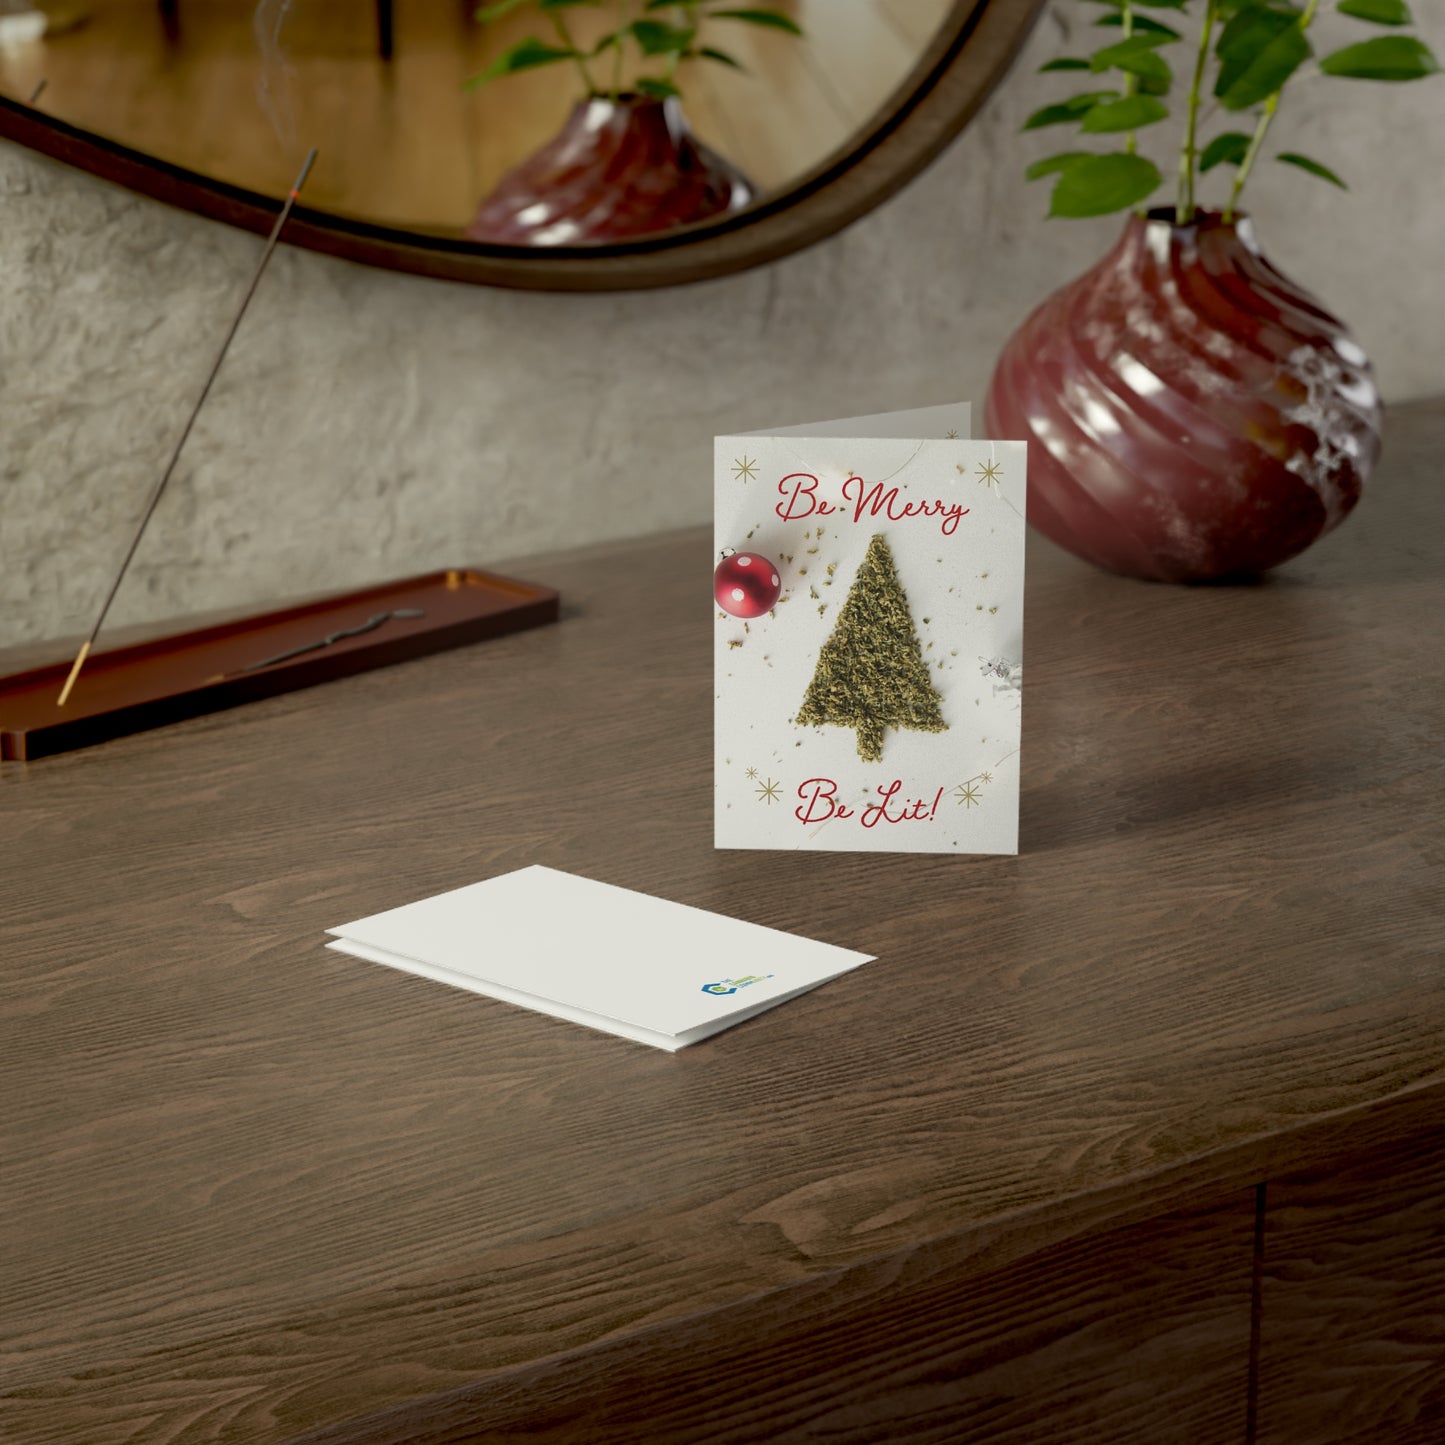 Be Merry Be Lit Christmas card being shown front, back,  laying on a table top with incense burning in the background along with a vase and mirror.